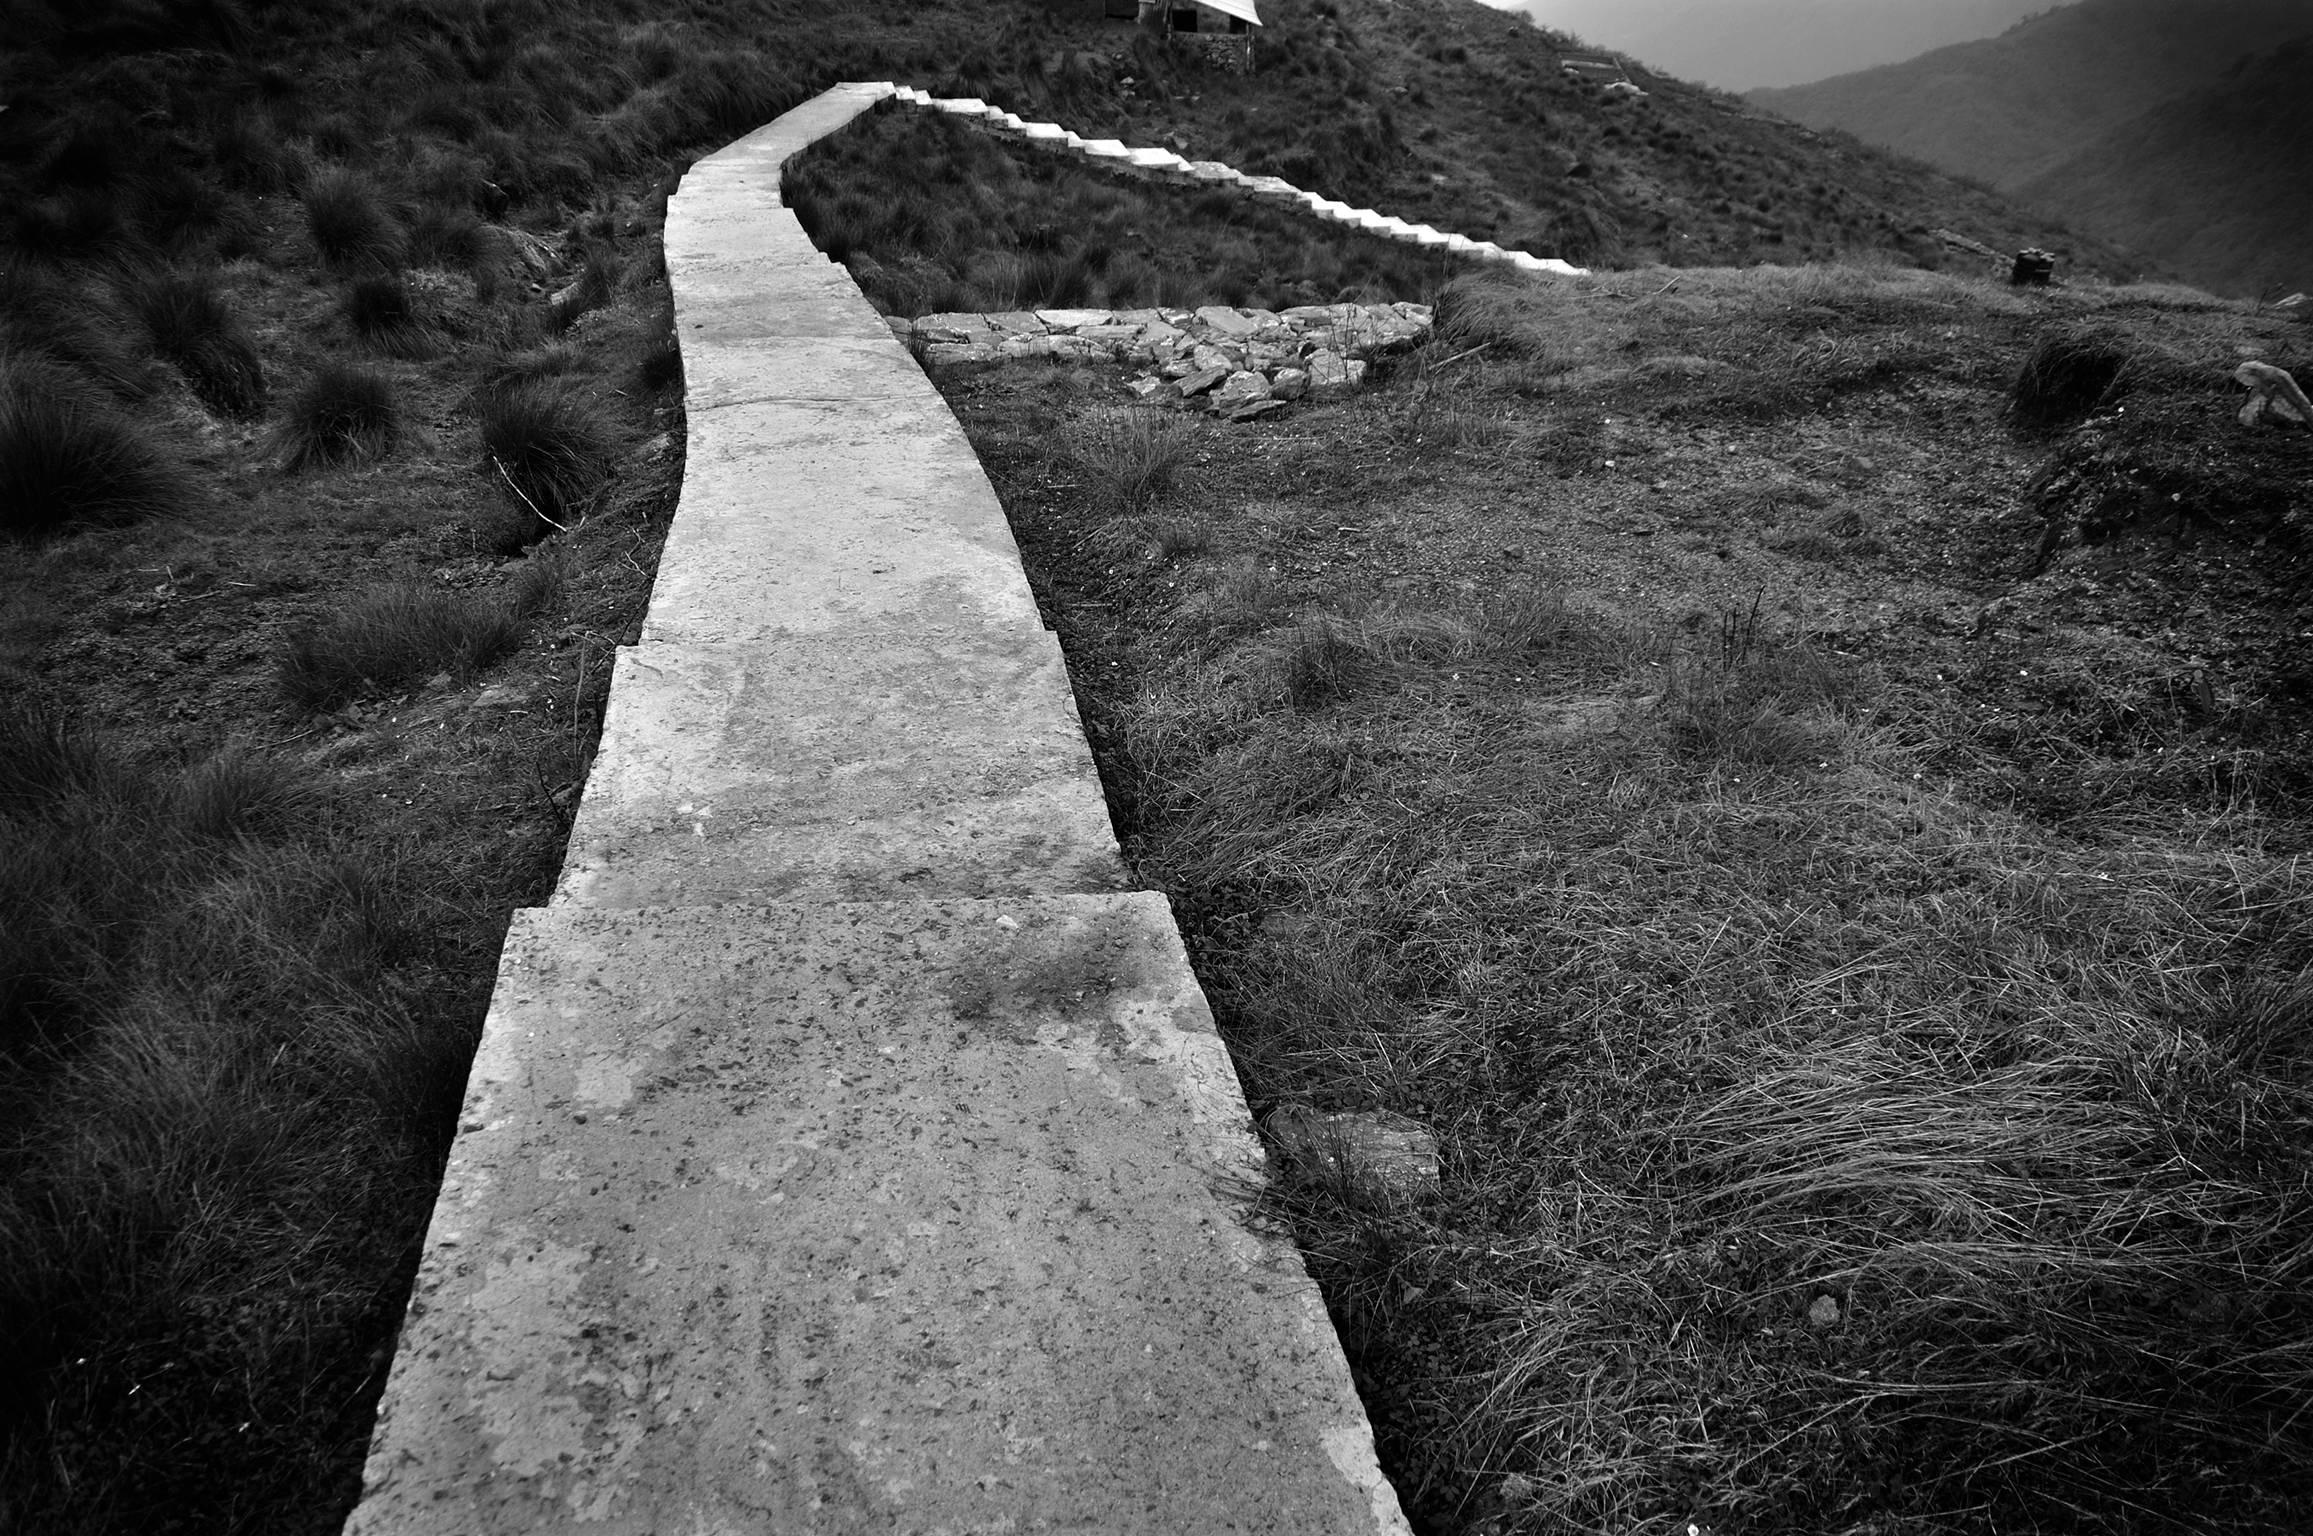 Mohan L. Mazumder Landscape Photograph - Hilly Stairs, Scenery, Black & White Photography by Indian Artist "In Stock"